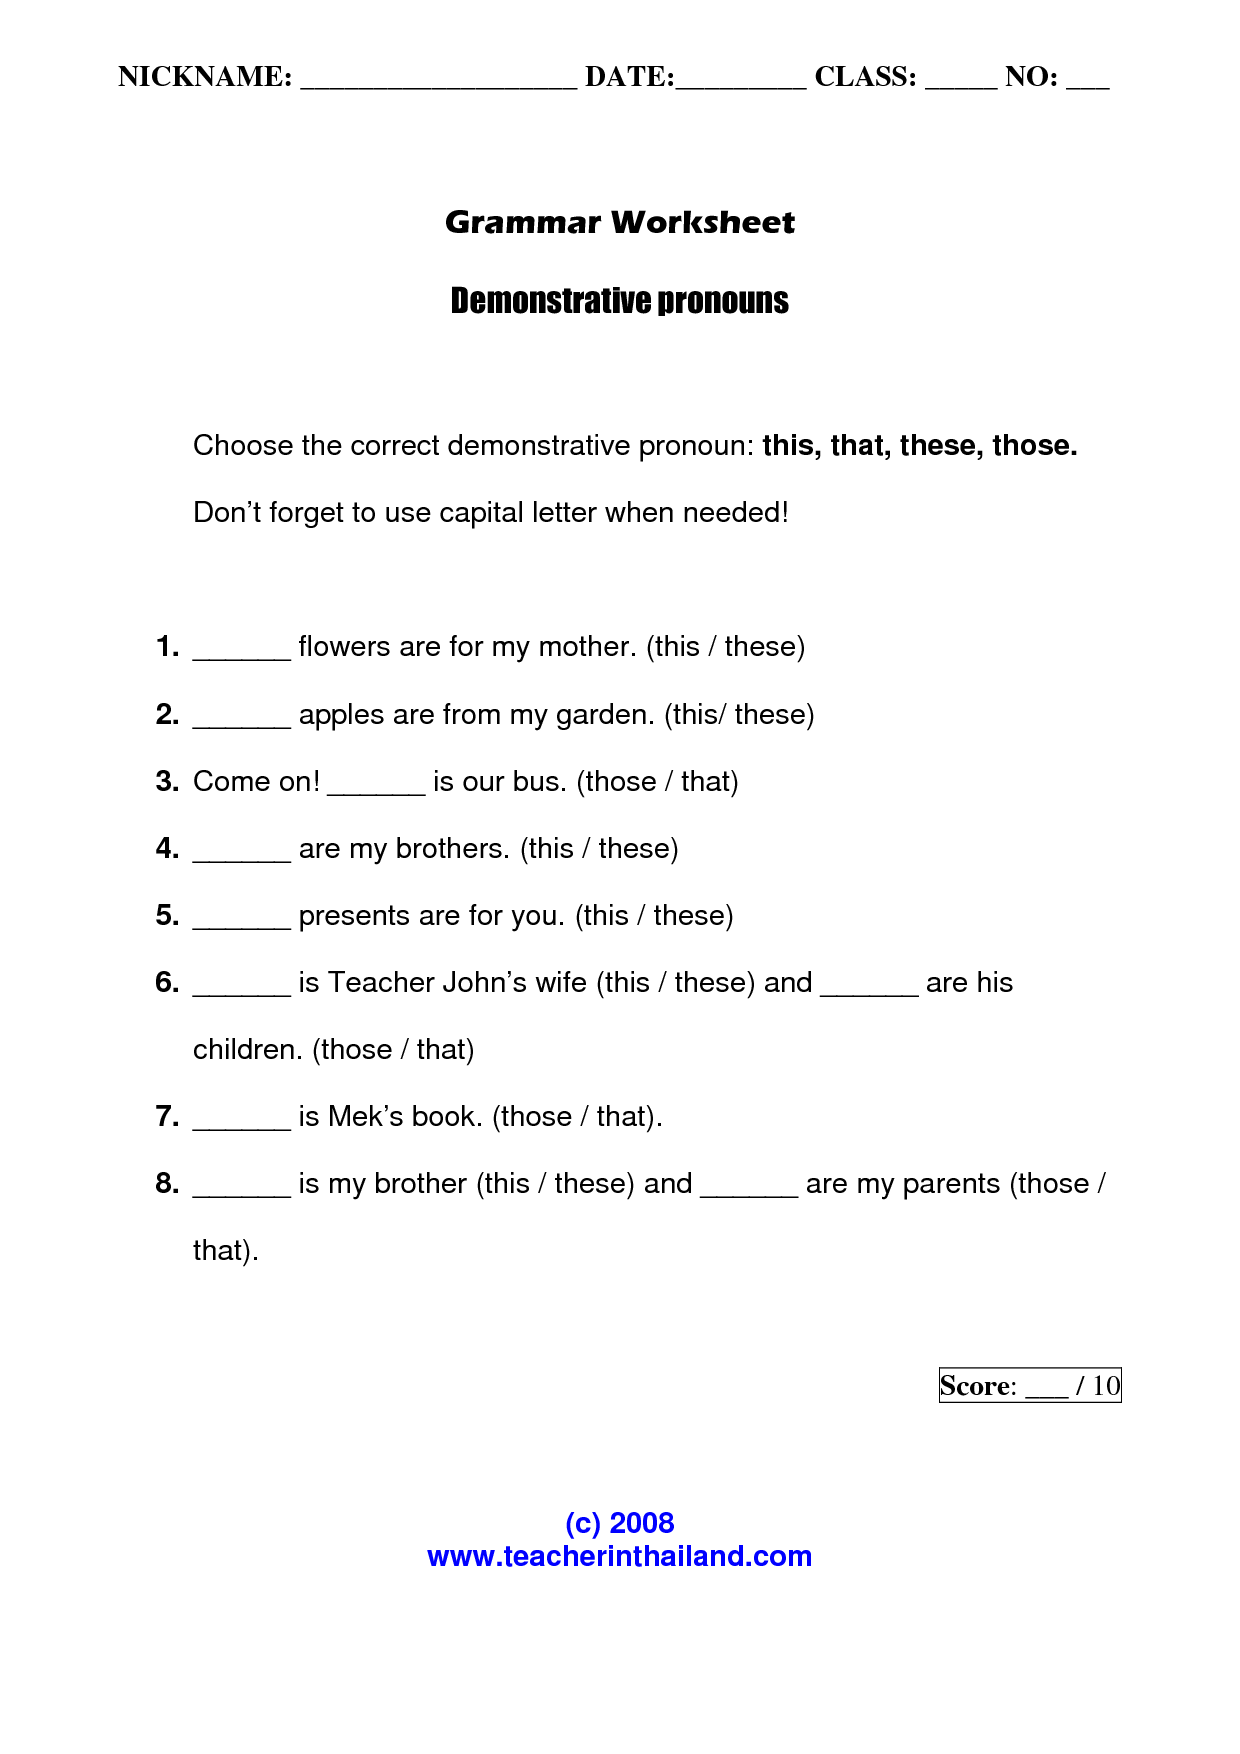 12-best-images-of-relative-pronouns-worksheets-demonstrative-pronouns-worksheet-relative